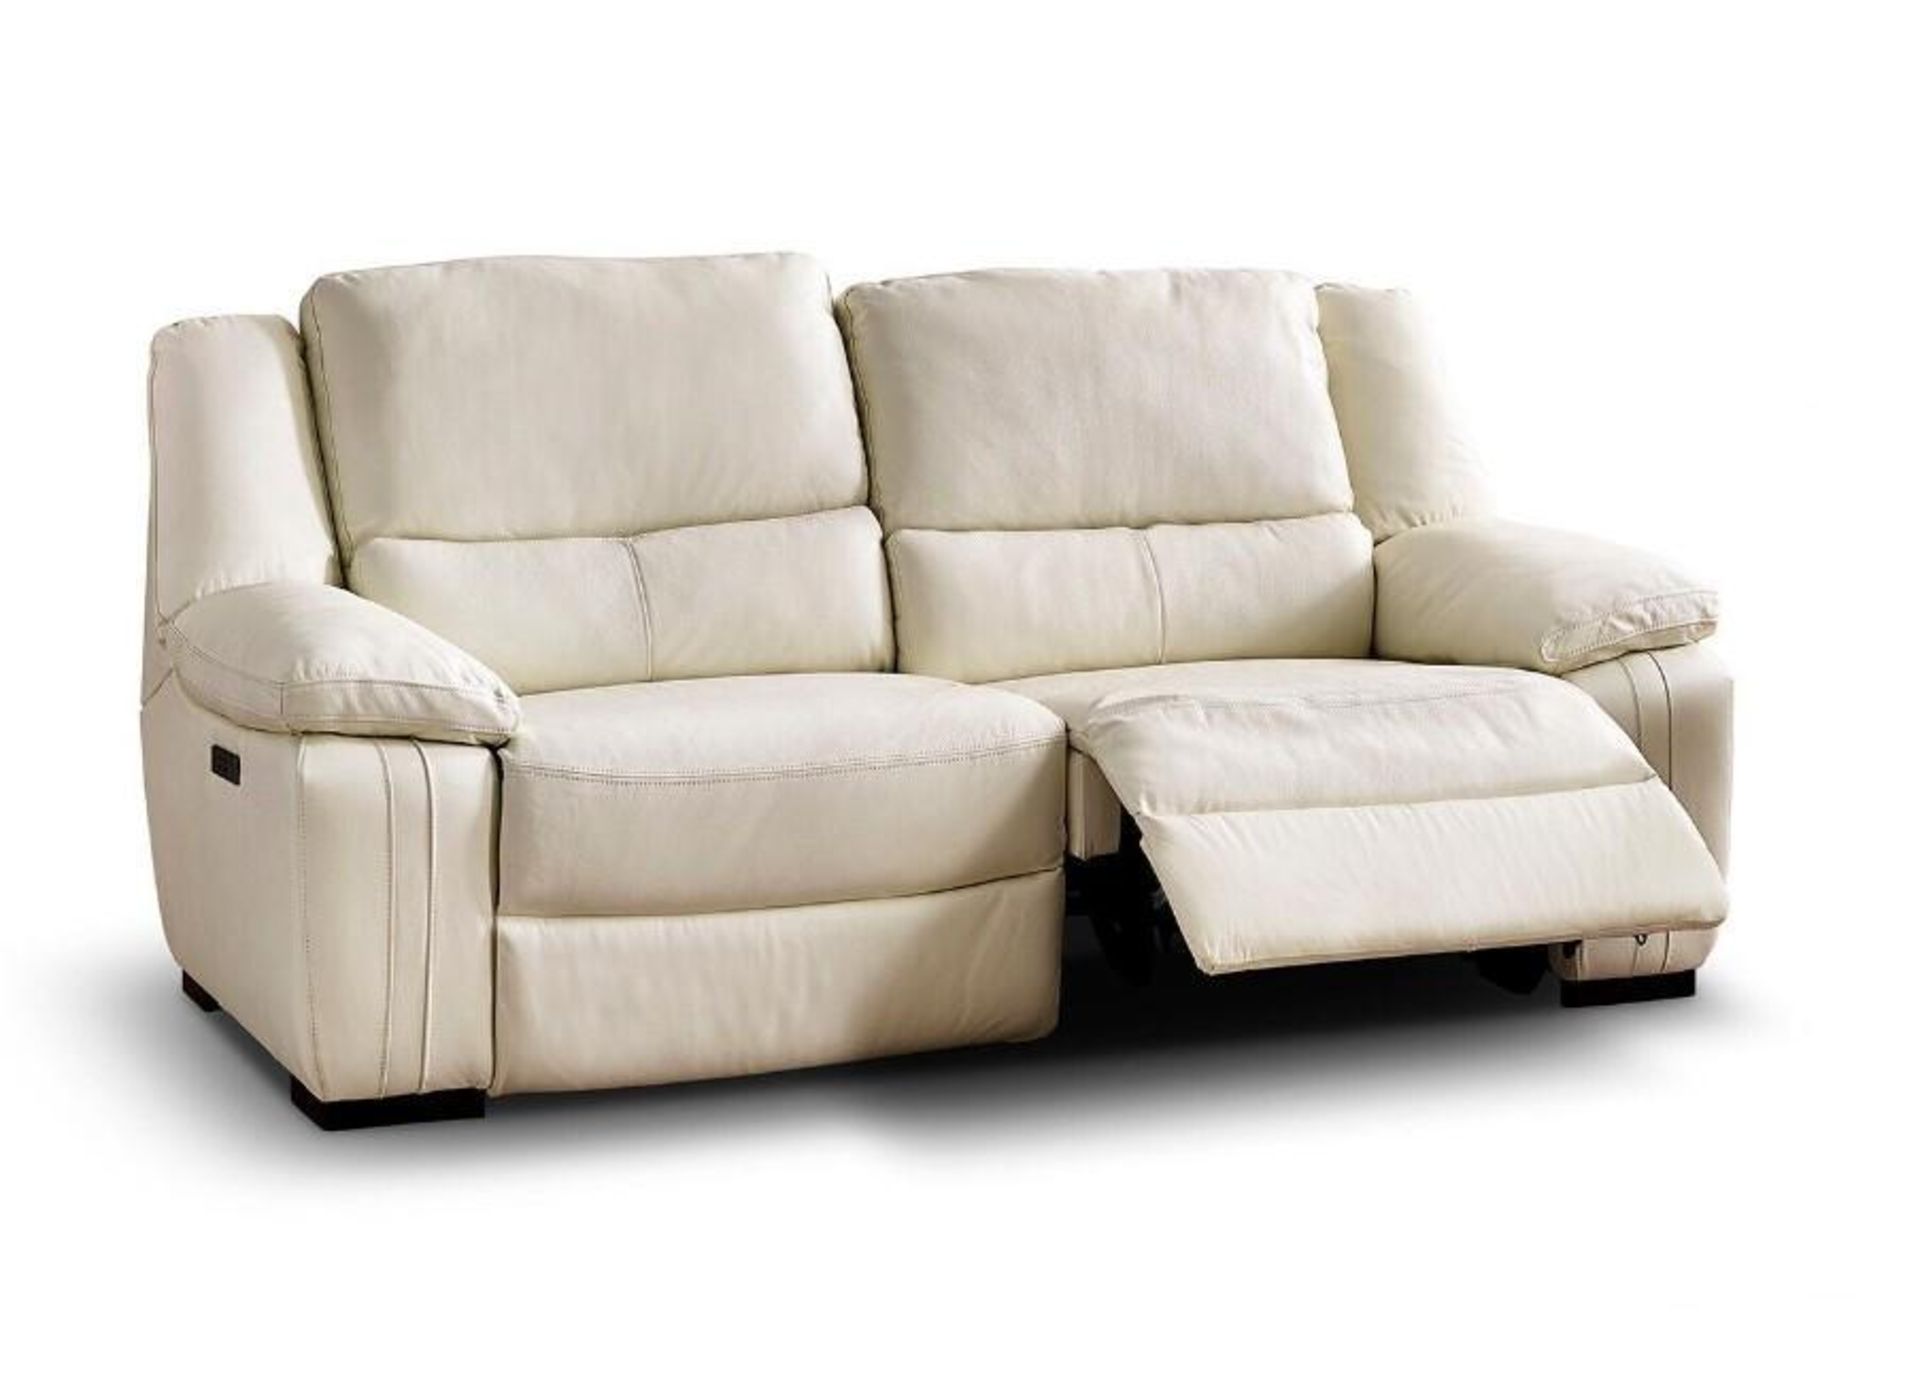 Brand new and boxed SCS Fallon 2 seater electric reclining sofa in Cream. - Bild 6 aus 7